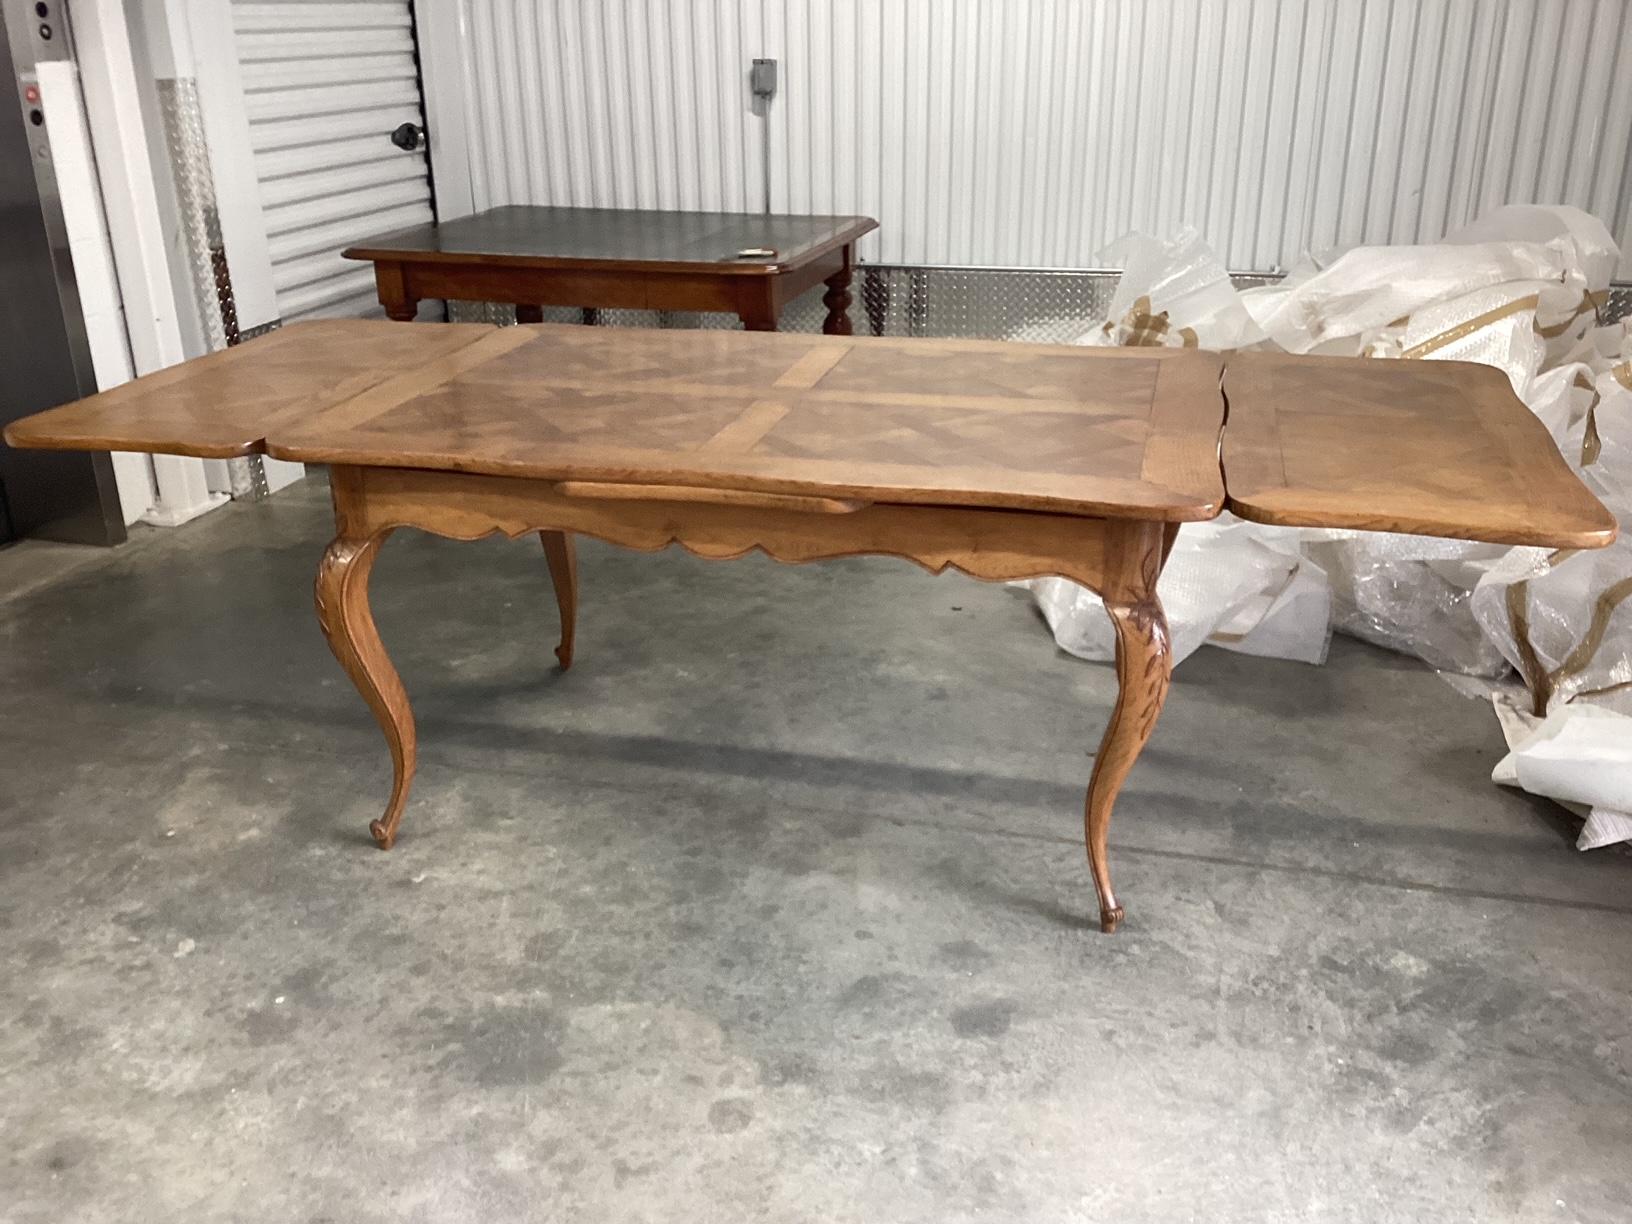 Exceptional French Louis XV style dining table having light oak parquet top and delicate cabriole legs.
Imported from France, this table opens with 2 leaves and extends to 97